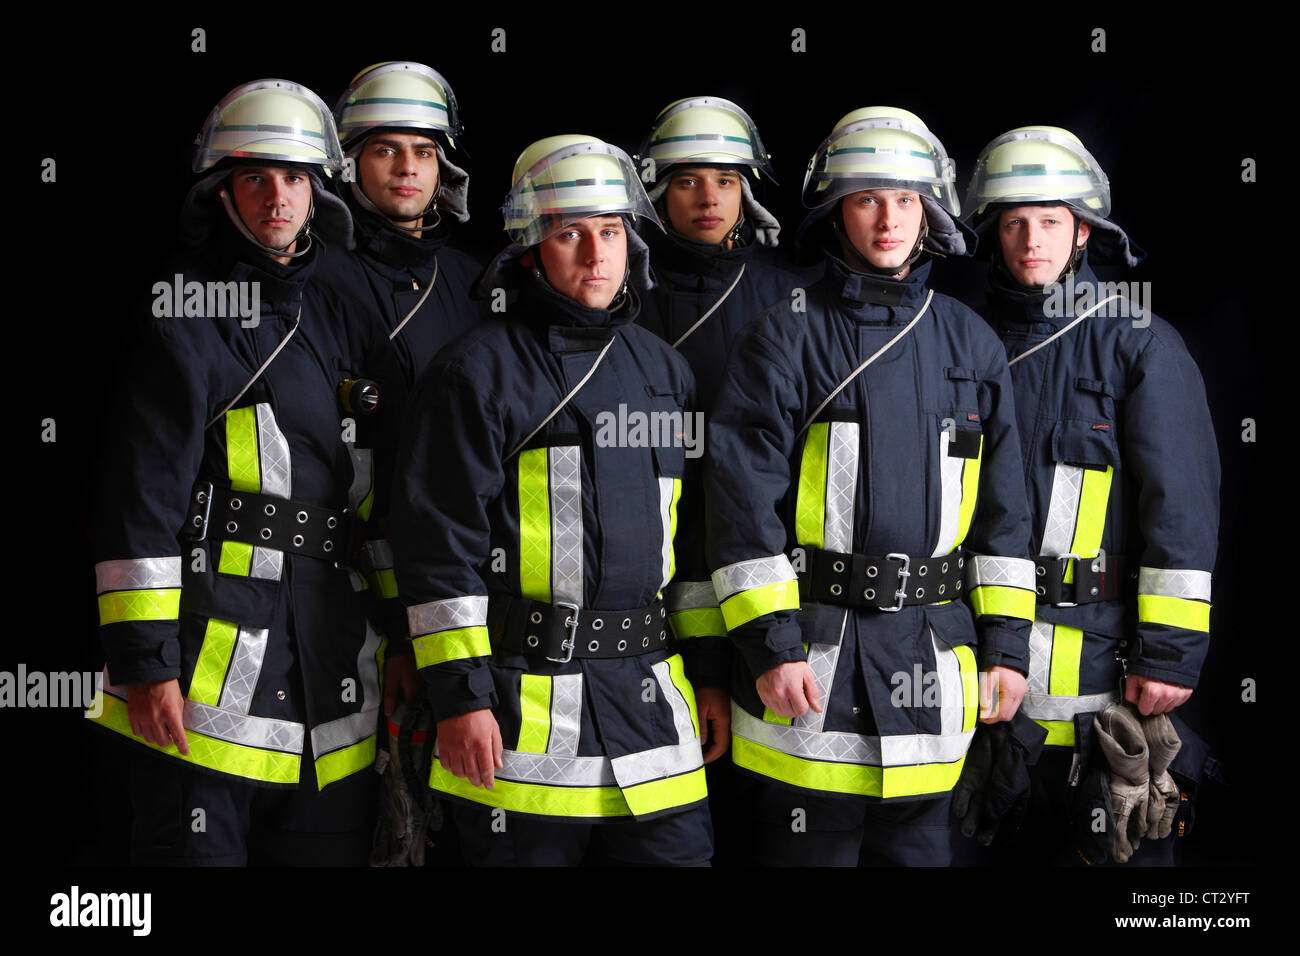 Firefighters in special fireproof suits, Nomex suit, helmet with visor, safety line. Professional fire eating. Stock Photo